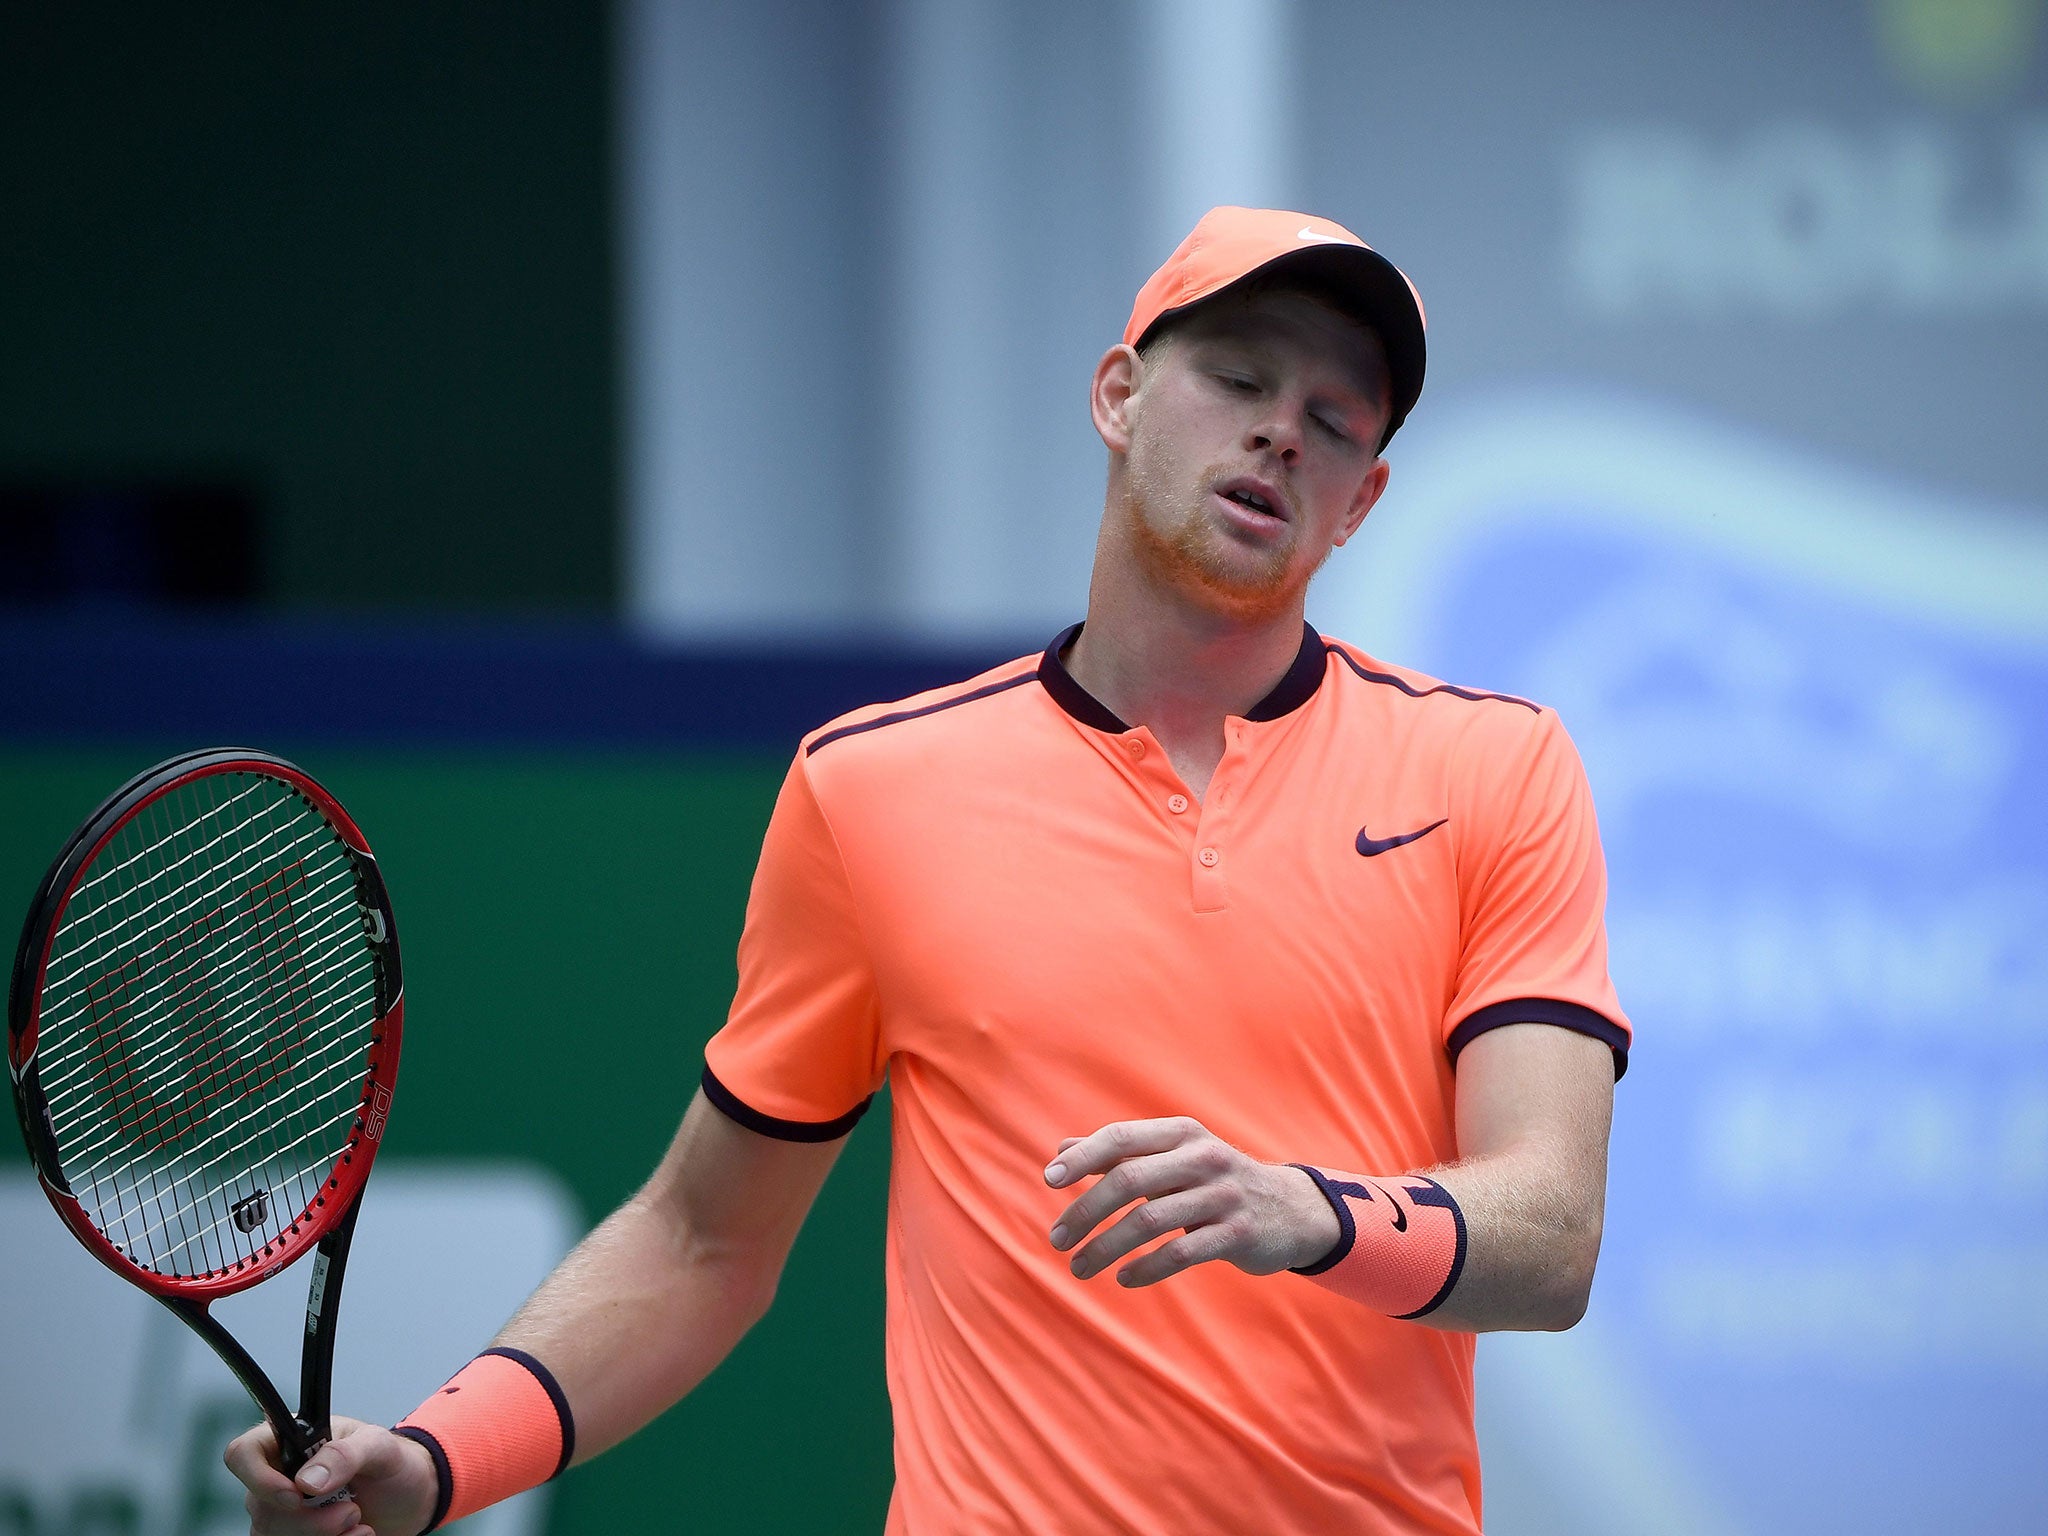 Edmund had been looking to pull off another major upset but Wawrinka proved too much